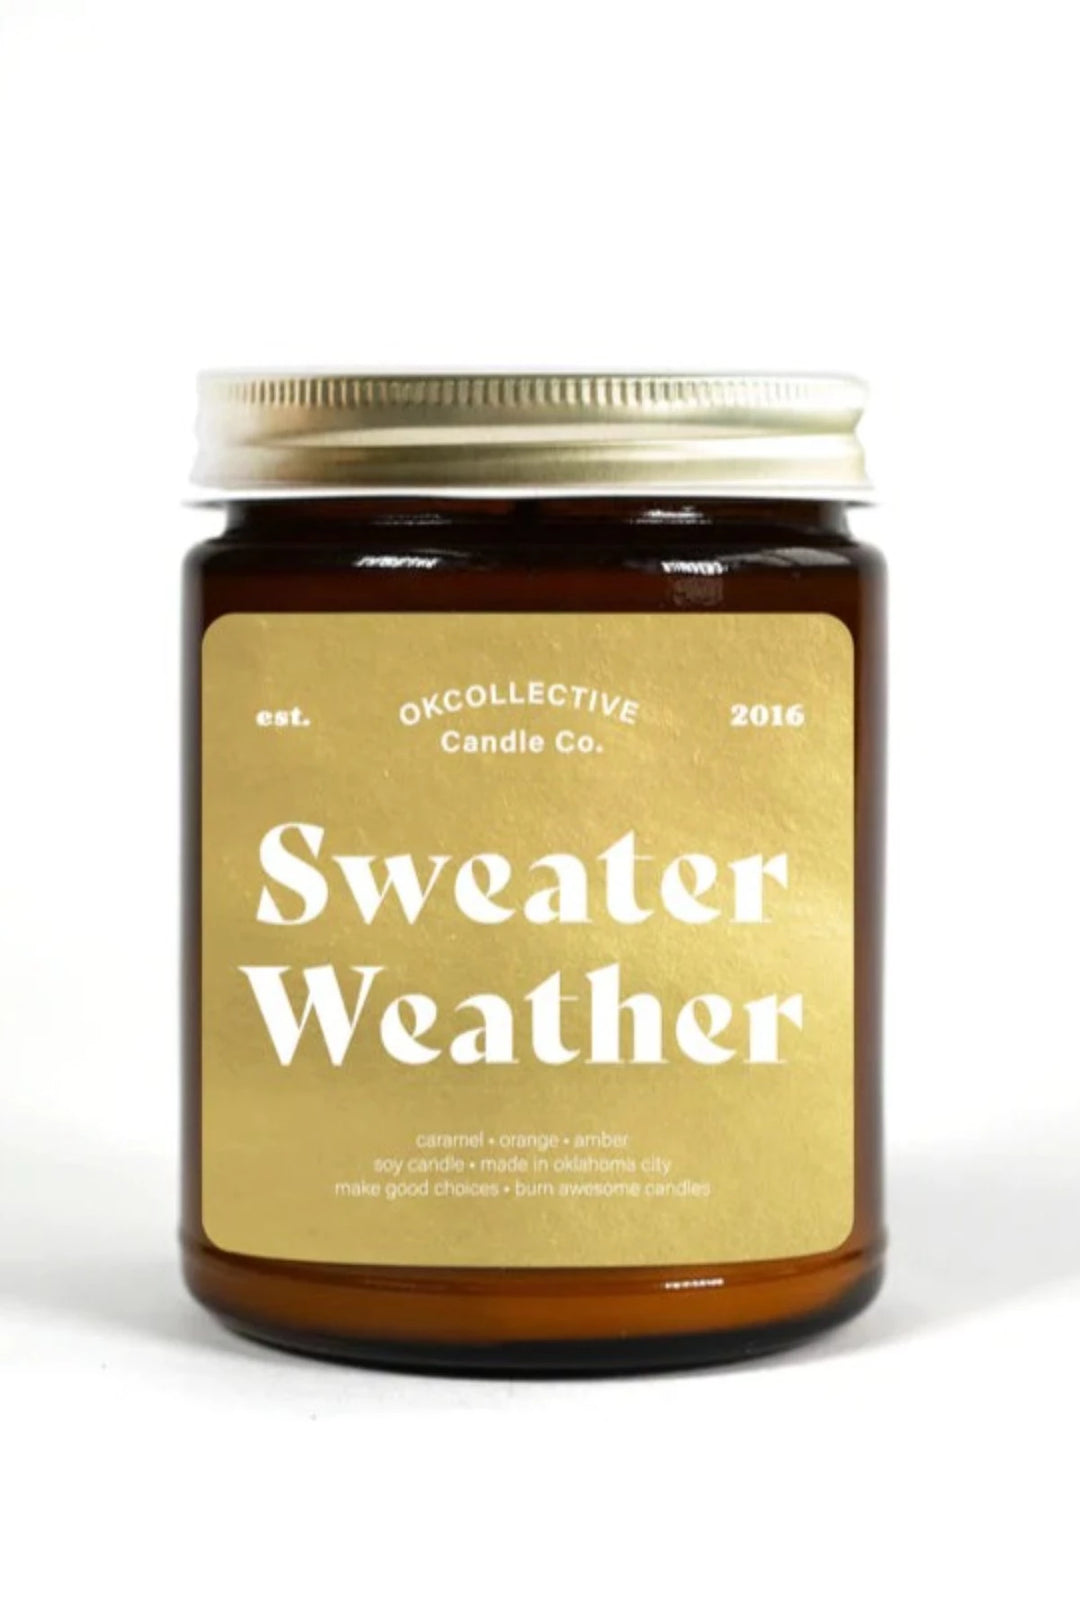 SWEATER WEATHER HOLIDAY Soy Candle - 8oz. OKcollective Candle Co. JAYDEN P BOUTIQUE